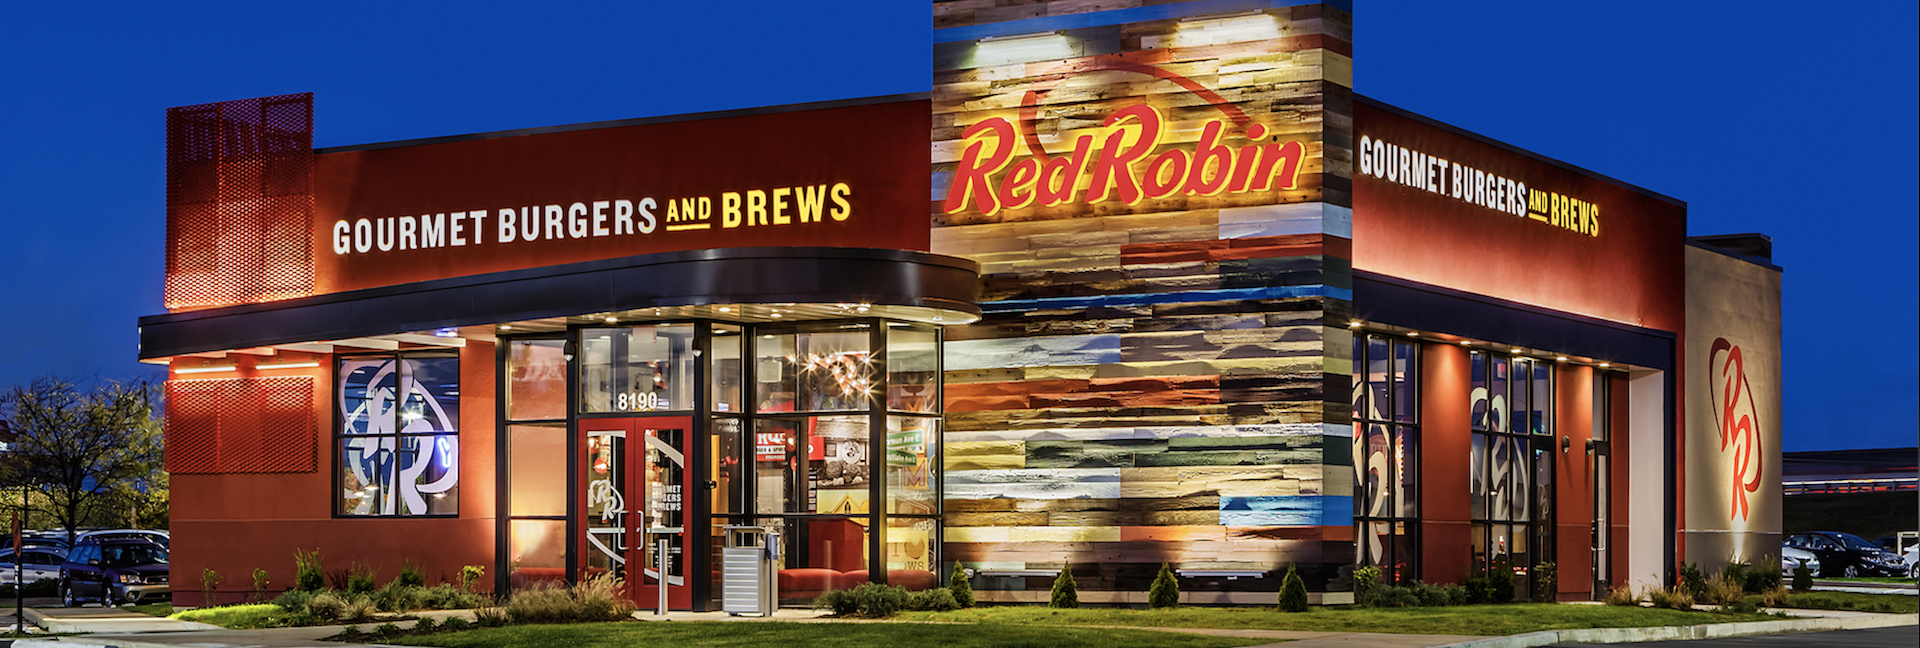 Our Work with Red Robin